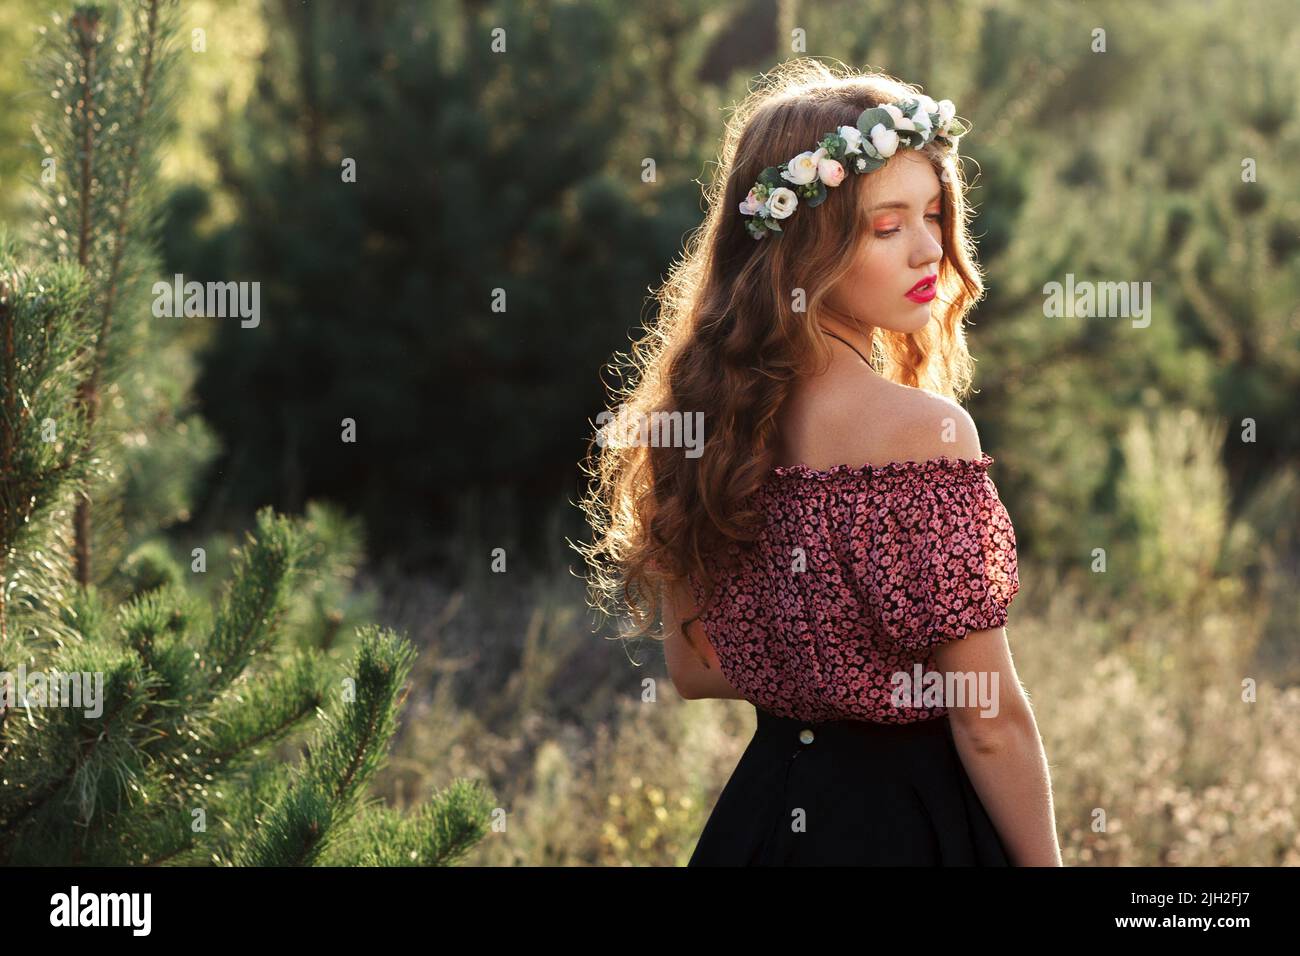 Beautiful girl standing in forest half-turned Stock Photo